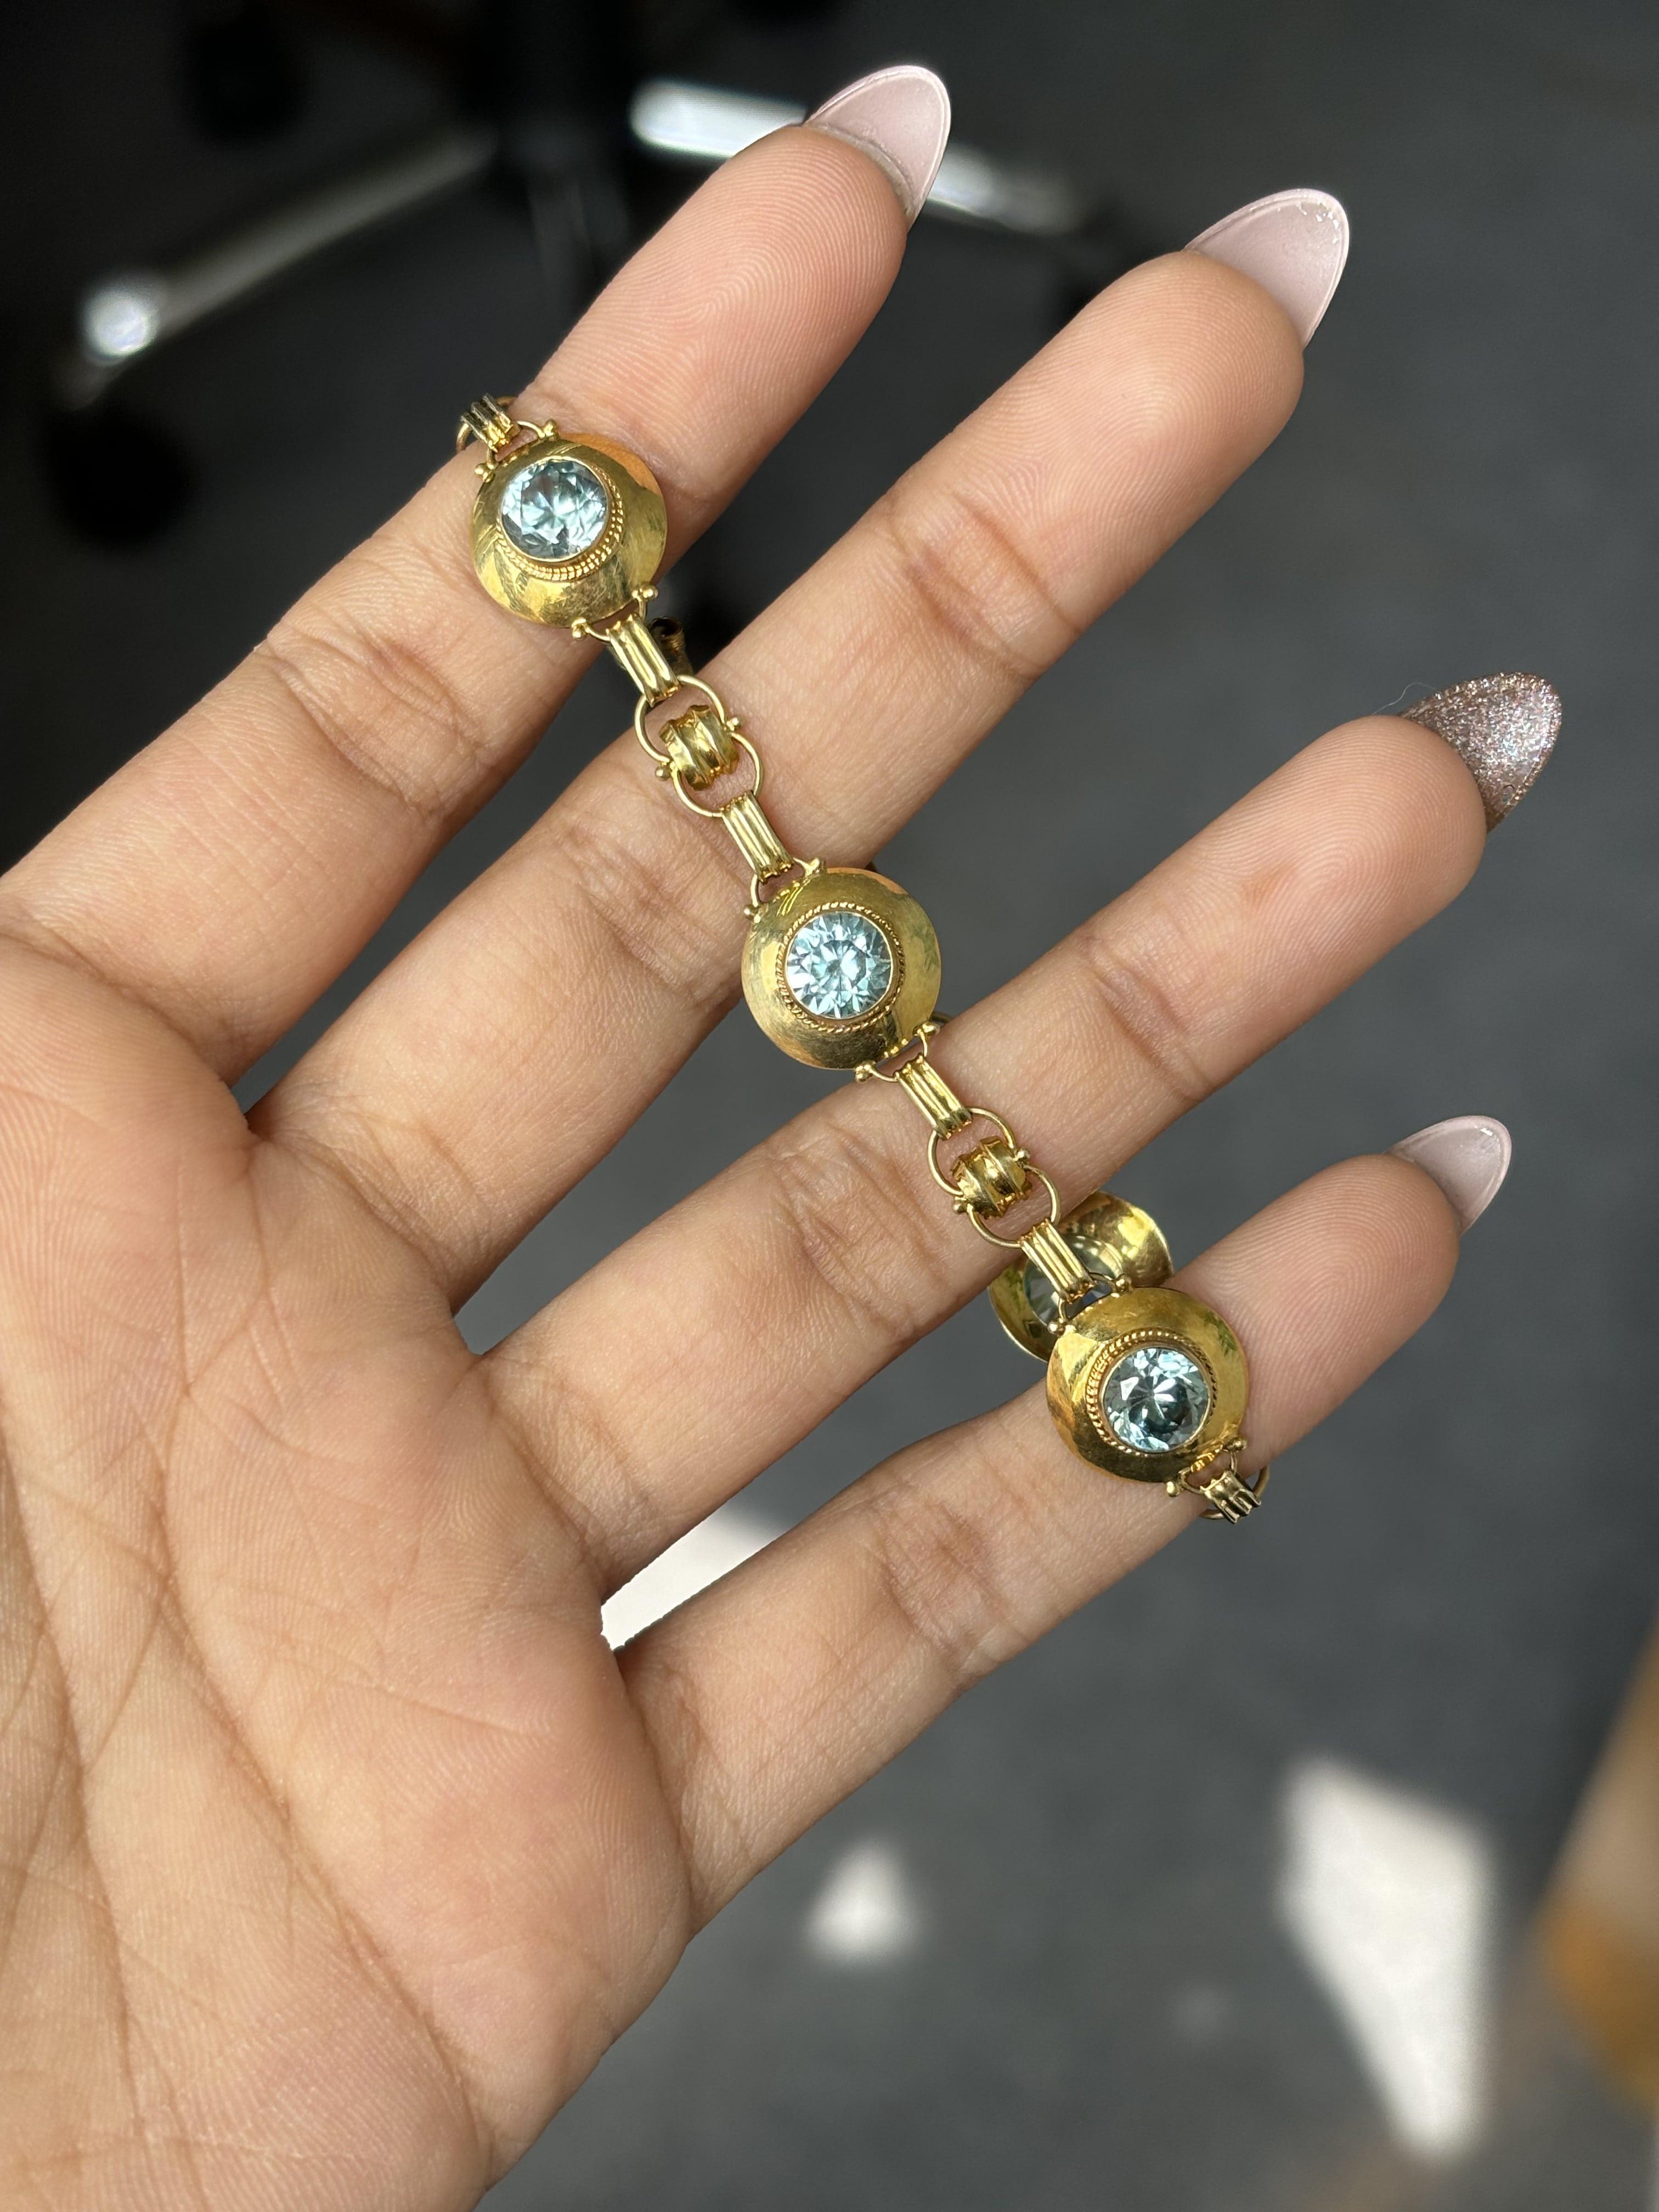 Paying an exquisite tribute to elegance and history, we have our ever-stunning, vintage bracelet that dates back to the 1900s. A cherished relic from an opulent era, this beauty is crafted with meticulous artistry and holds a timeless allure. Its